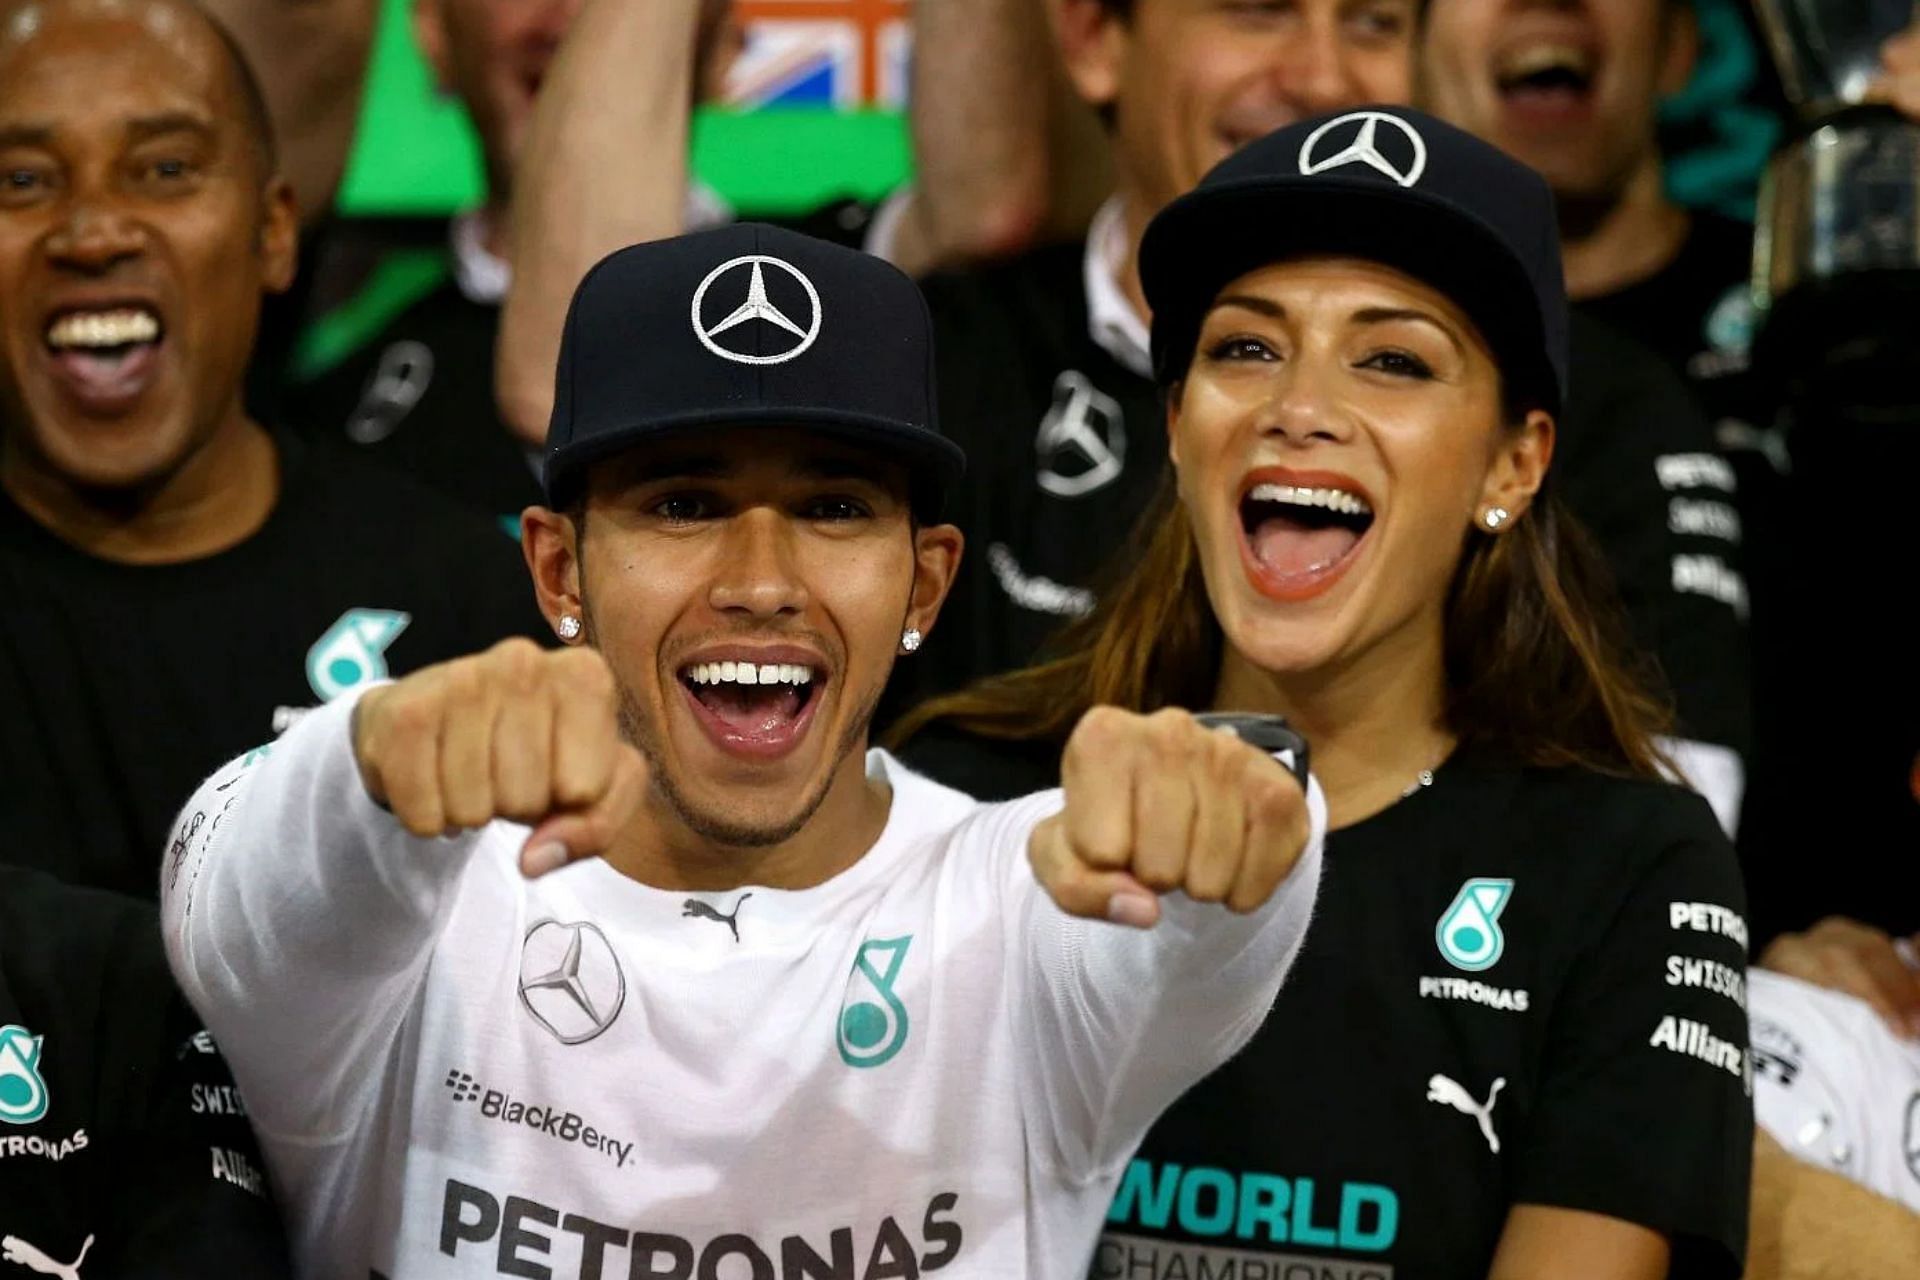 Lewis Hamilton celebrates with his team including Nicole Scherzinger after winning the World Championship after the 2014 F1 Abu Dhabi Grand Prix. (Photo by Clive Rose/Getty Images)